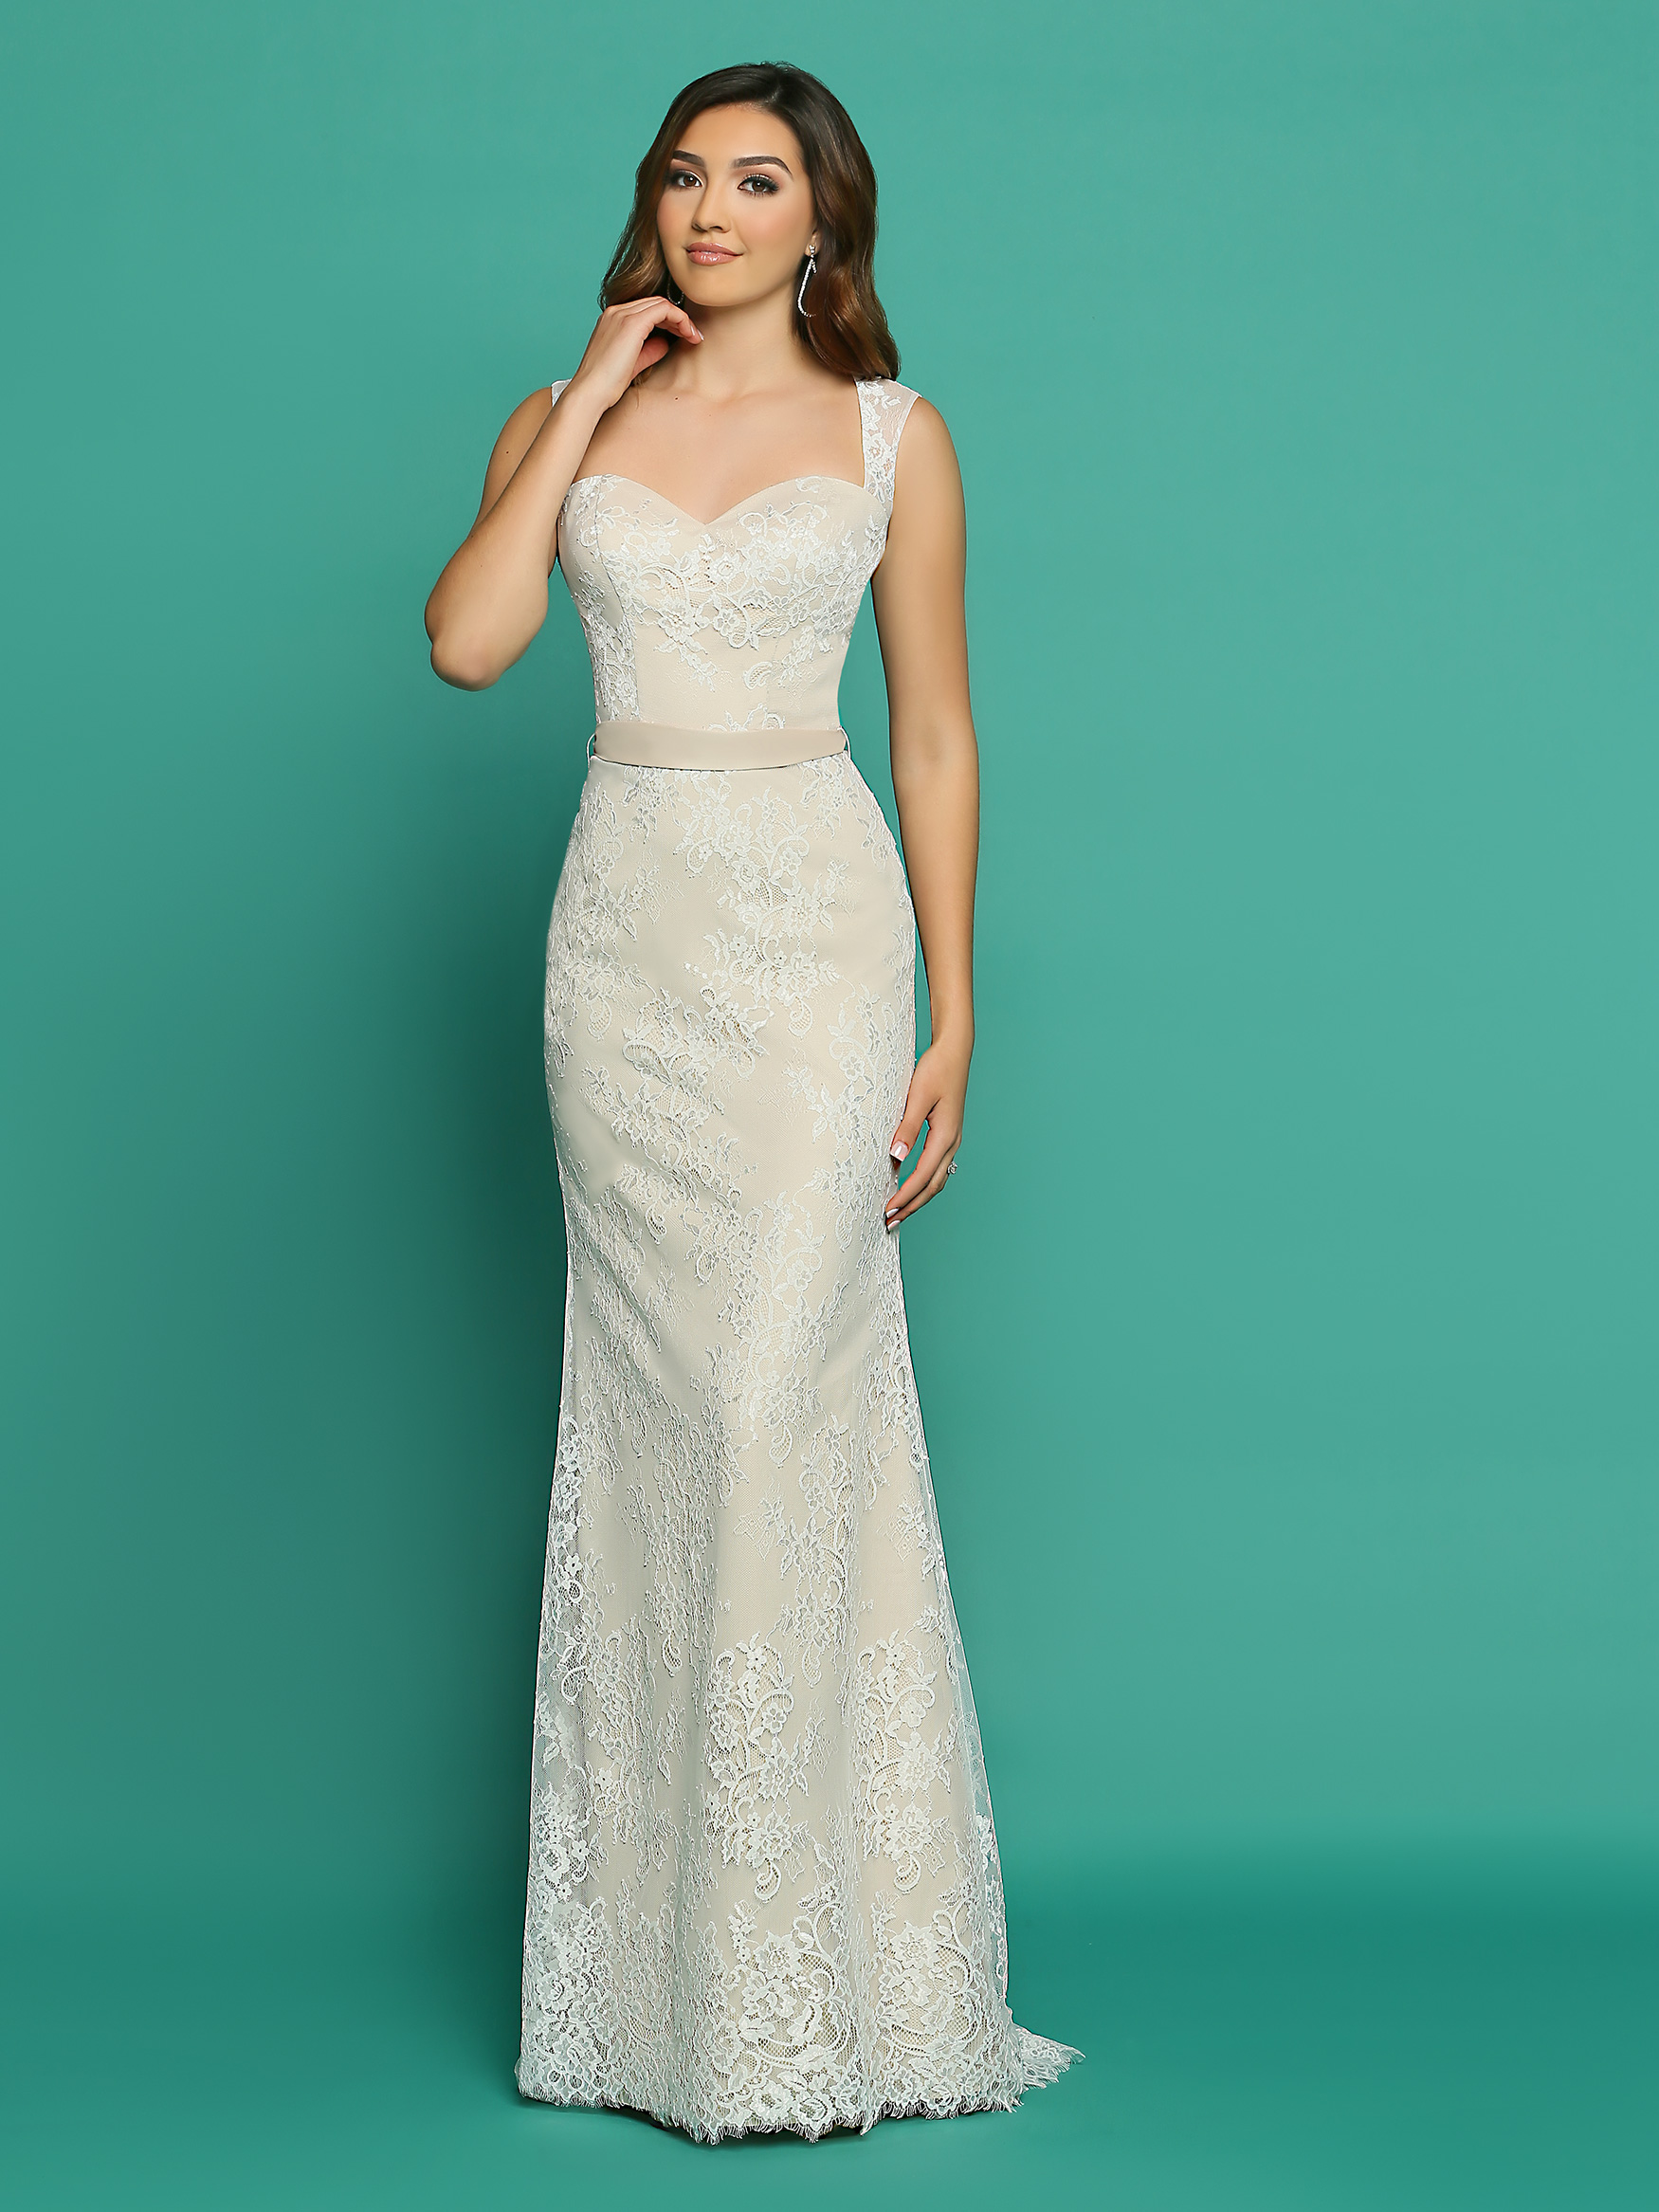 casual wedding dresses image showing front view of style #f7056 ... zjbonfq